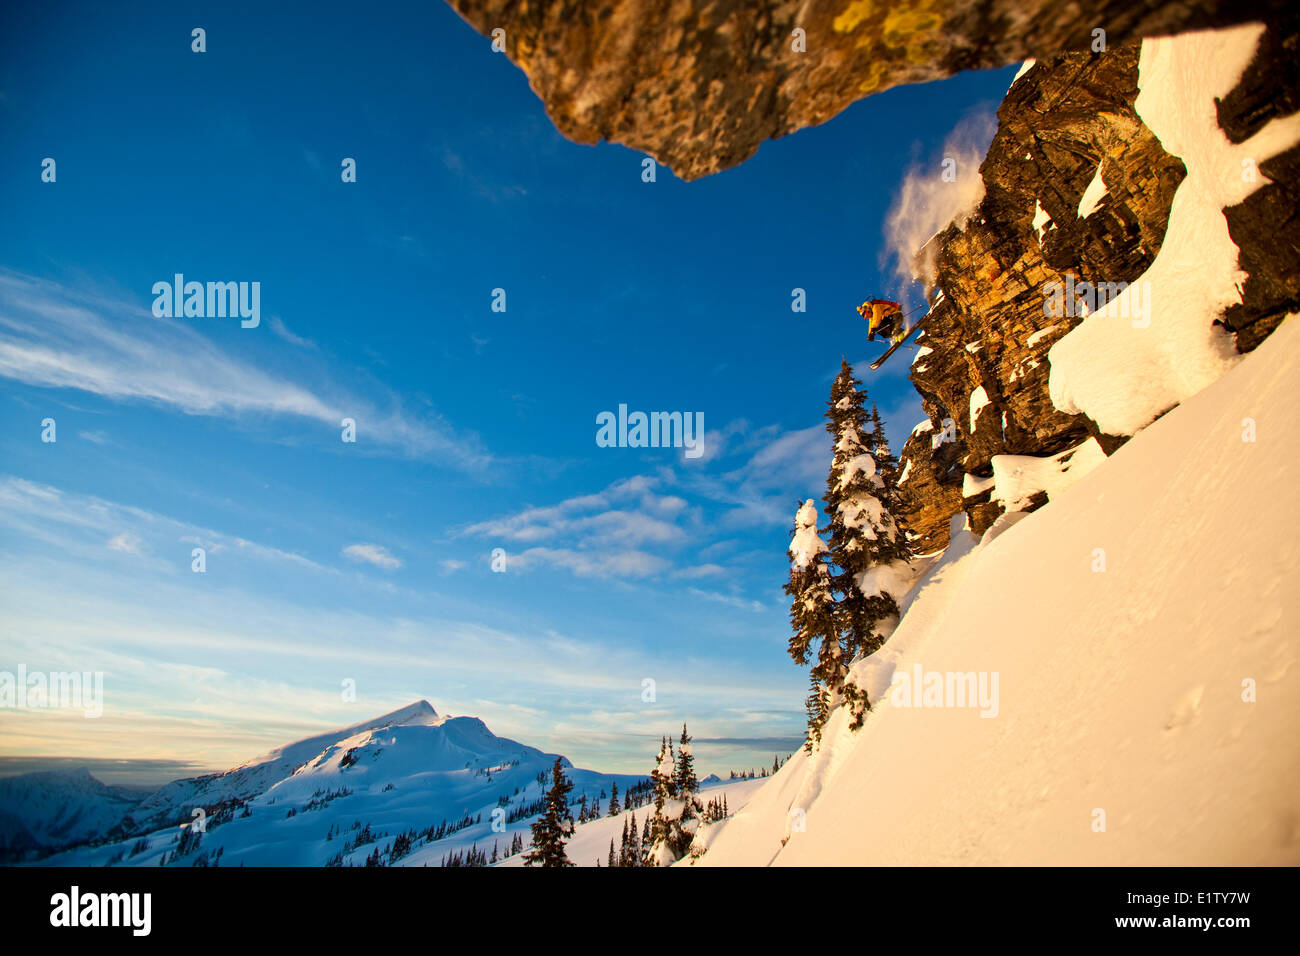 A male backcountry skier drops a cliff while out ski touring, Sol Mountain, Monashee Backcountry, Revelstoke, BC Stock Photo